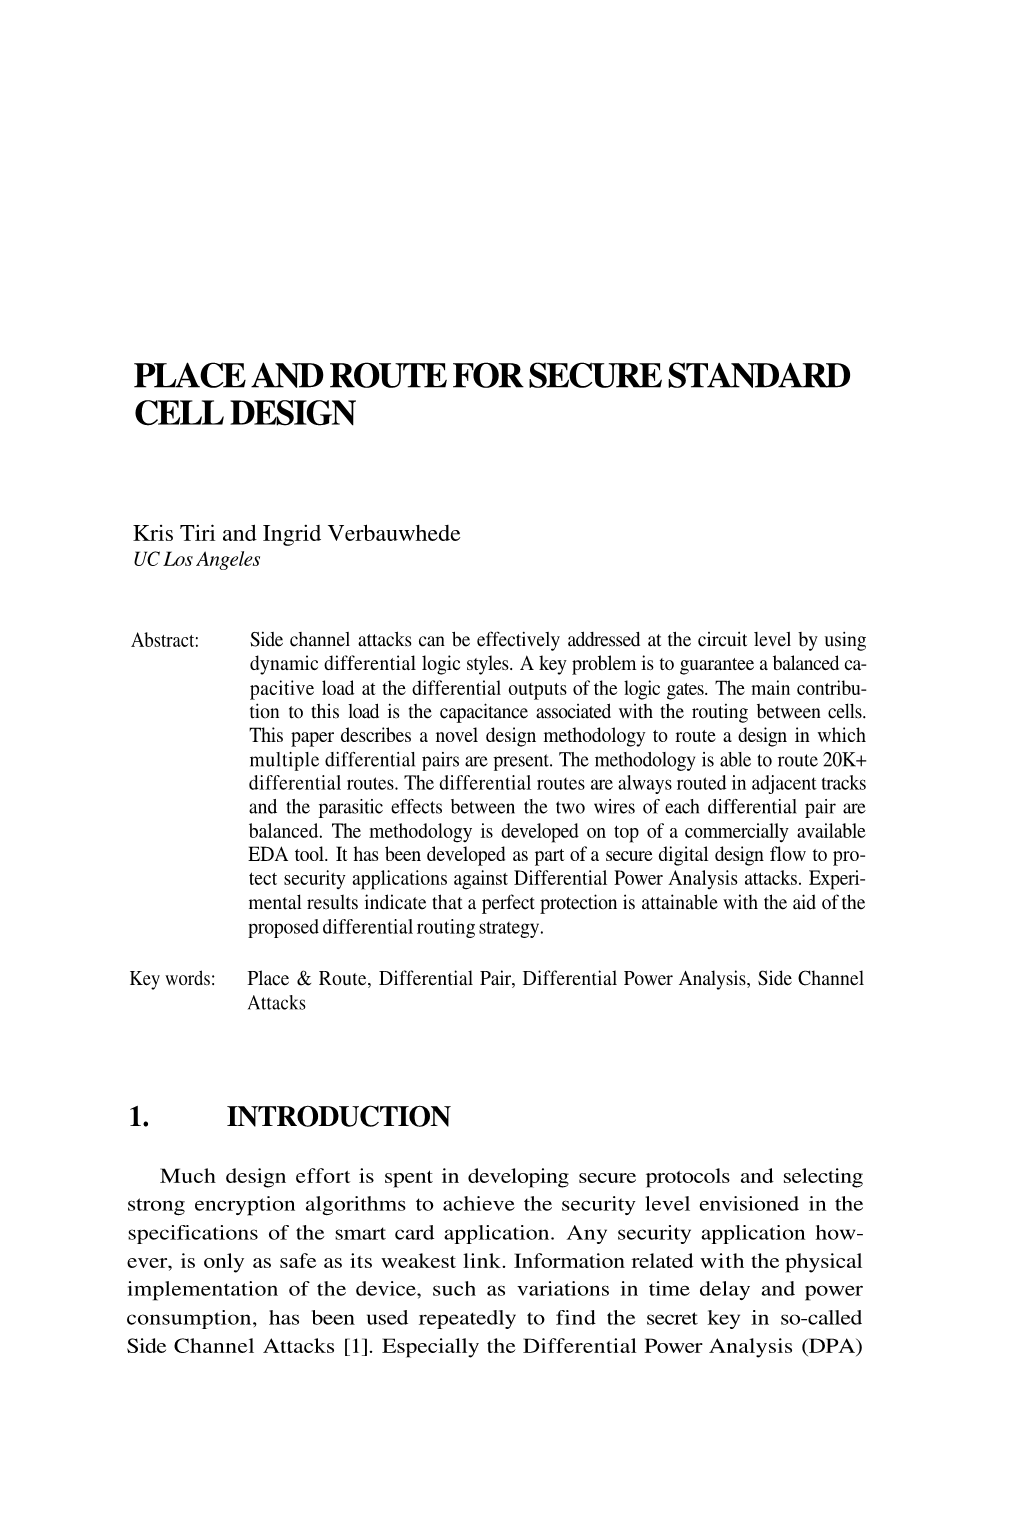 Place and Route for Secure Standard Cell Design